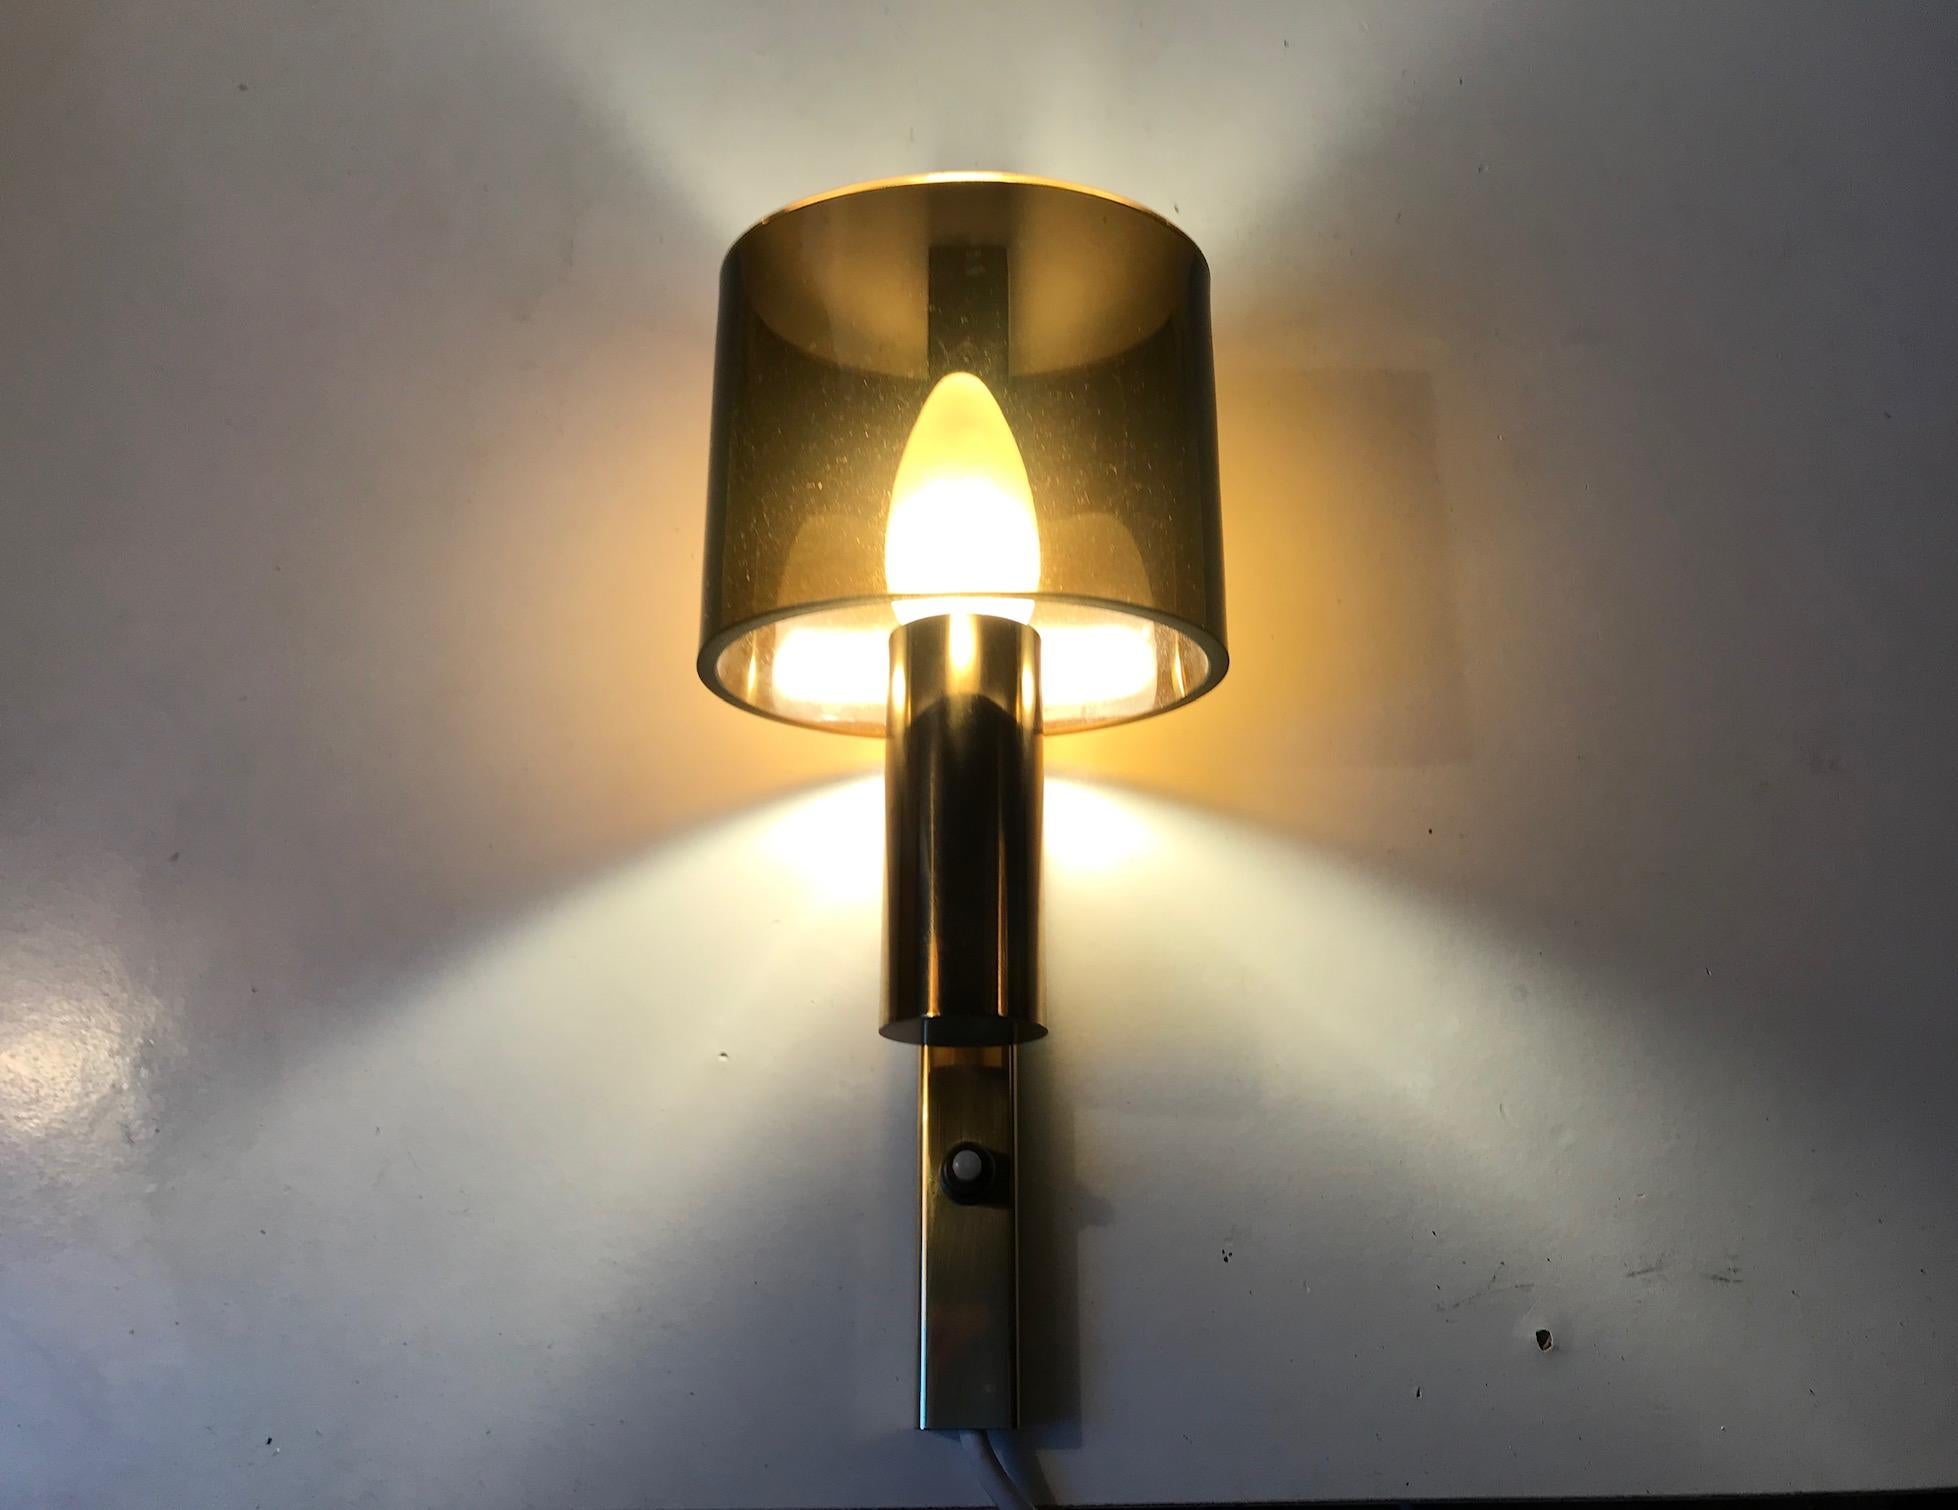 A rare and stylish wall light composed of gilded brass holding an ovale shade in smoked Lucite. Designed and manufactured by Hassel & Teudt in Denmark during the mid-late 1960s.